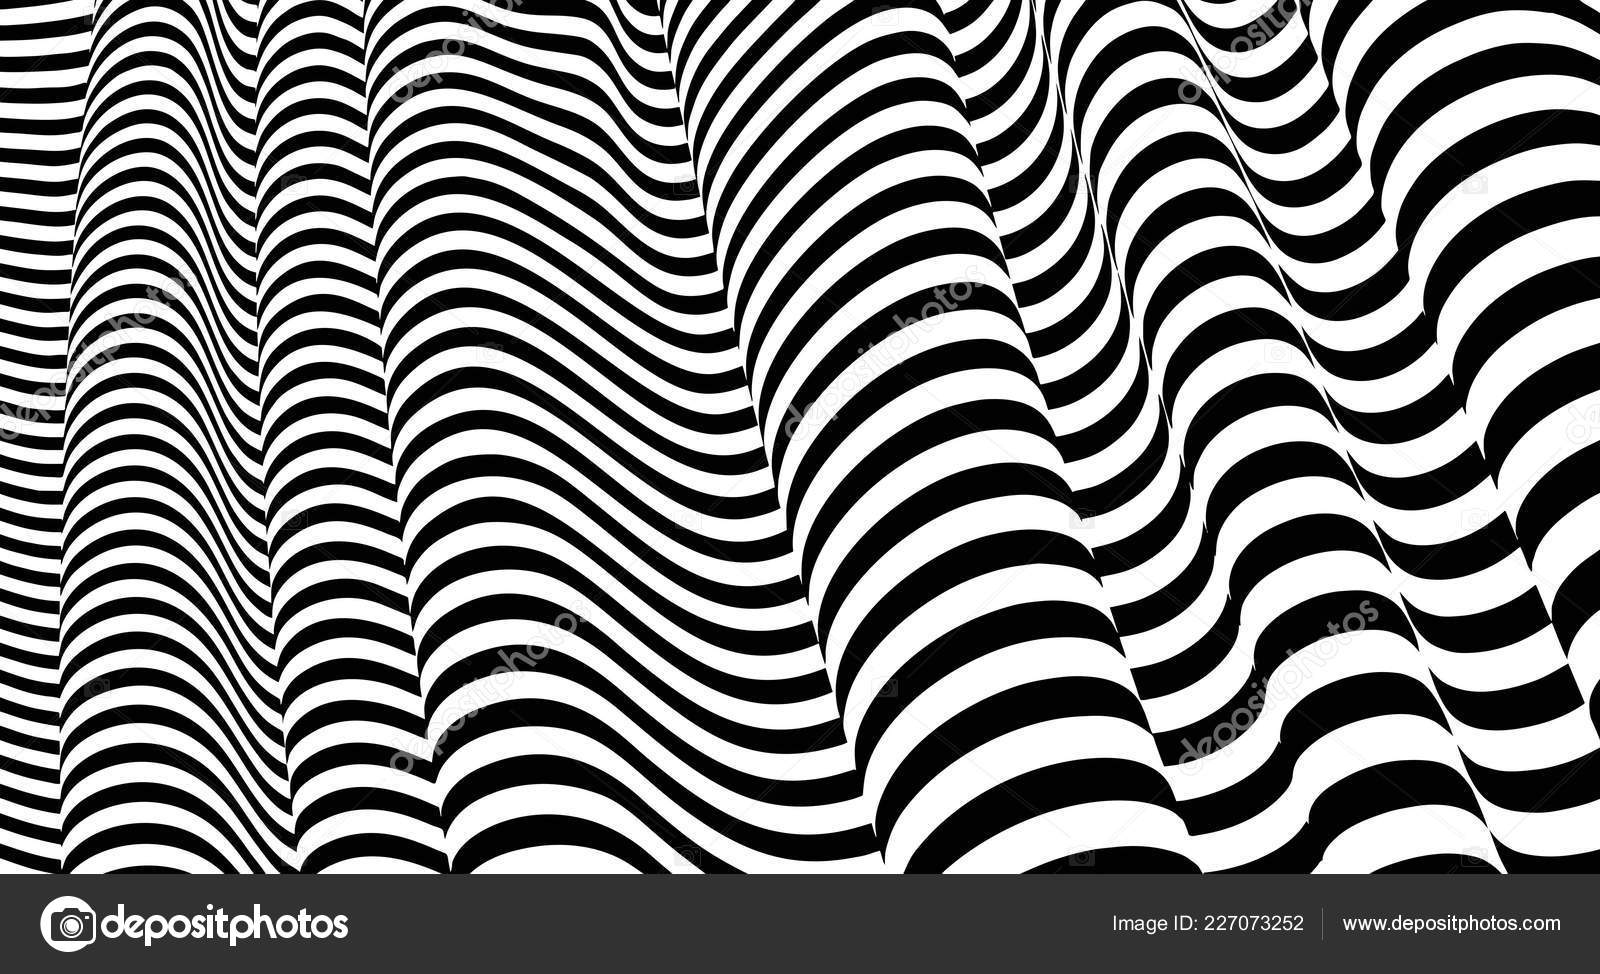 Optical illusion lines background. Abstract 3d black and white